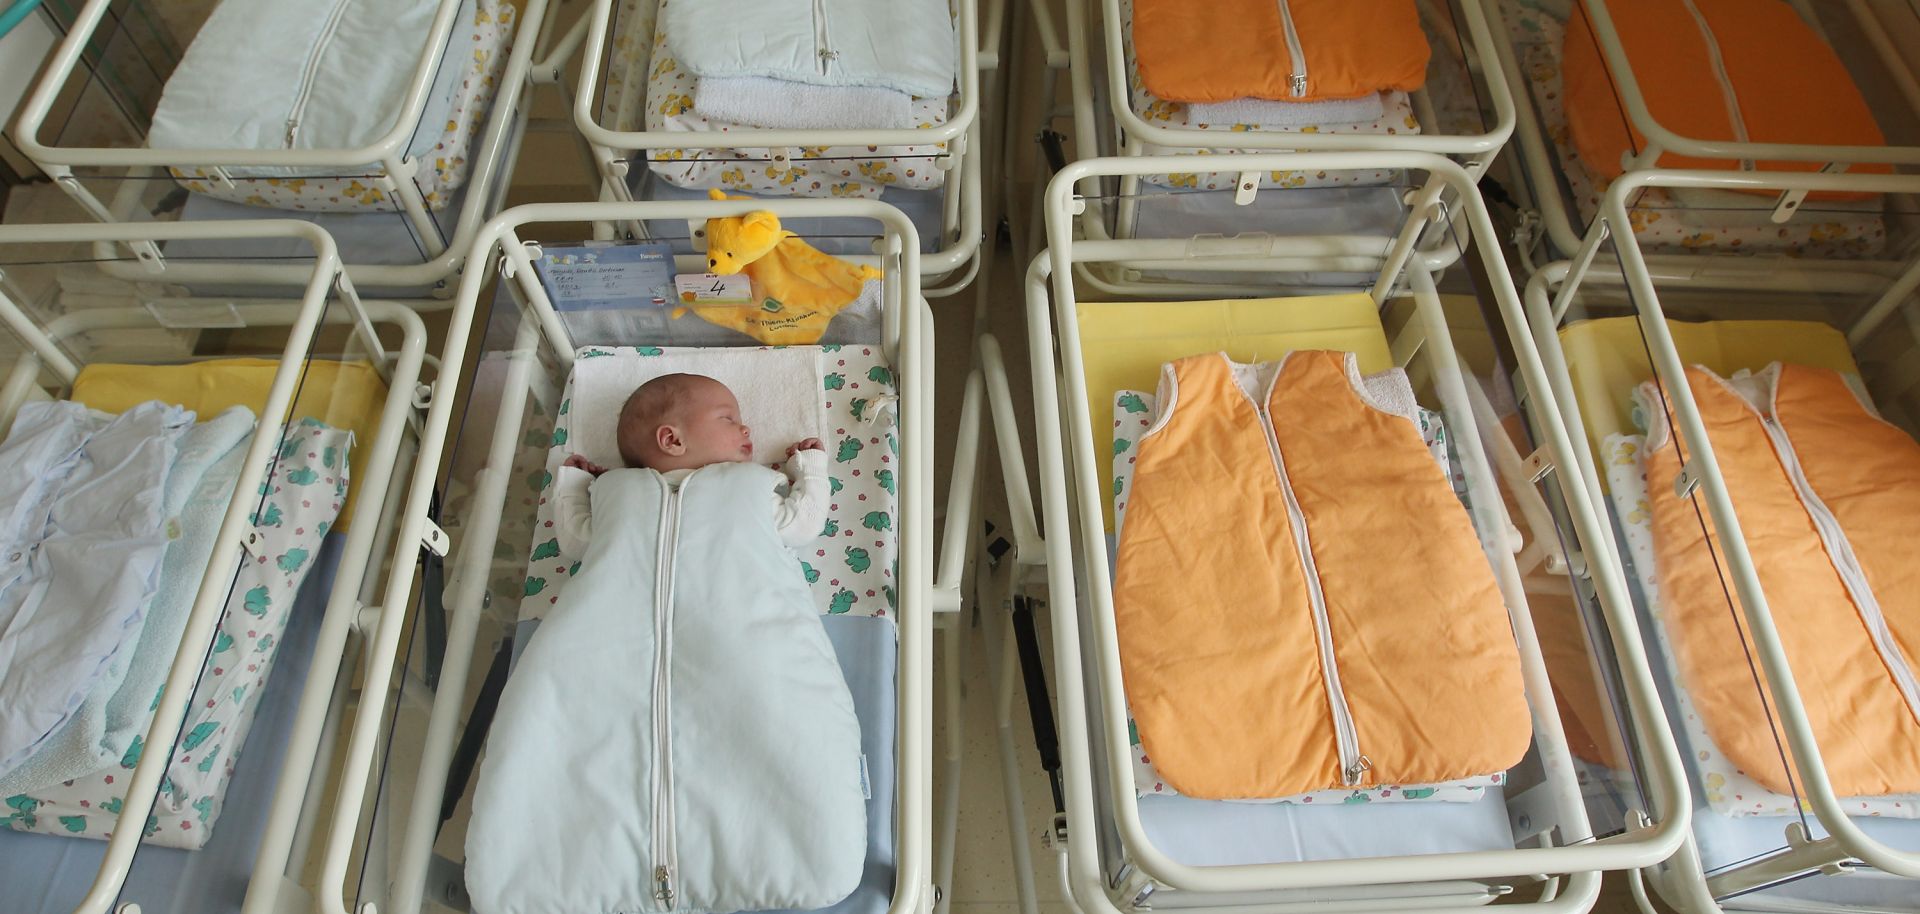  A 4-day-old newborn baby, who has been placed among empty baby beds in the maternity ward of a hospital.